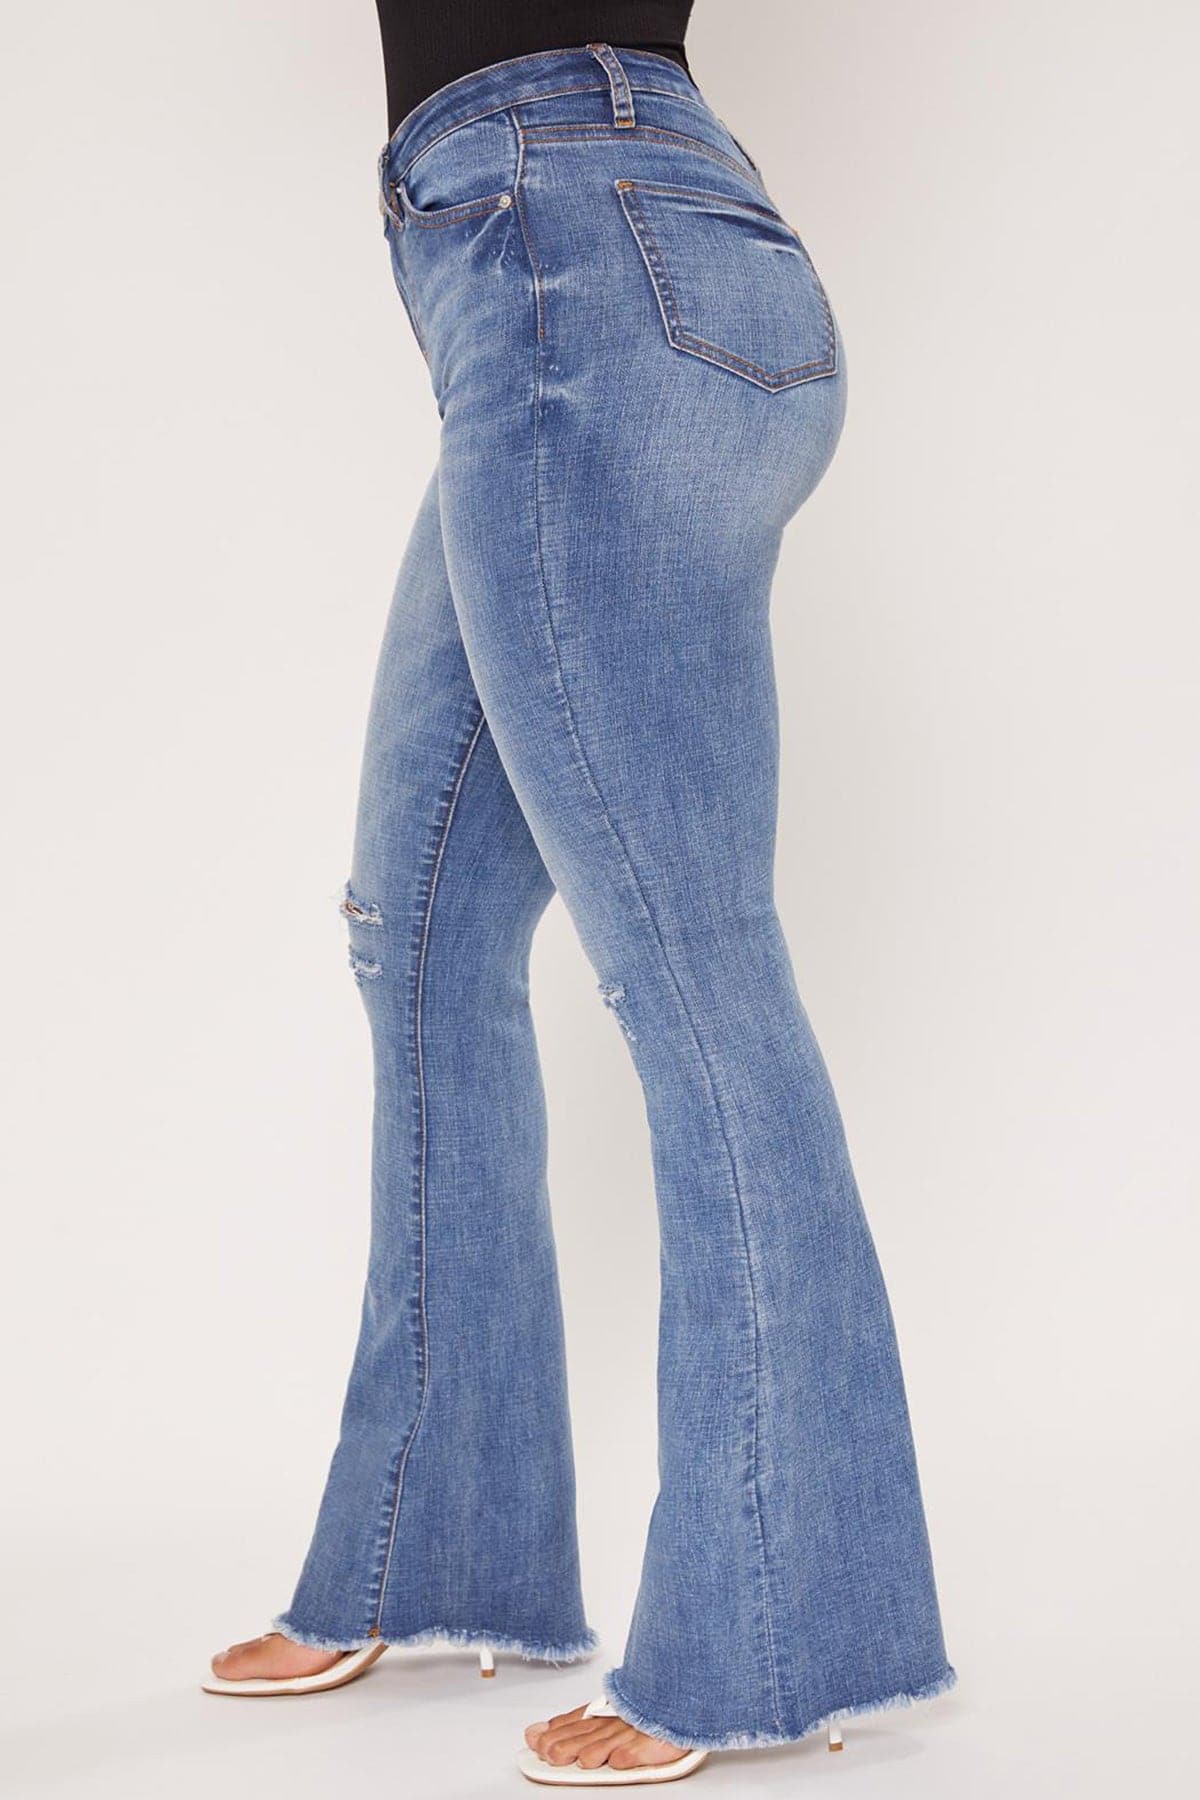 YMI Junior's Classic High Rise Flare Bell Bottom Jeans - Tall Long